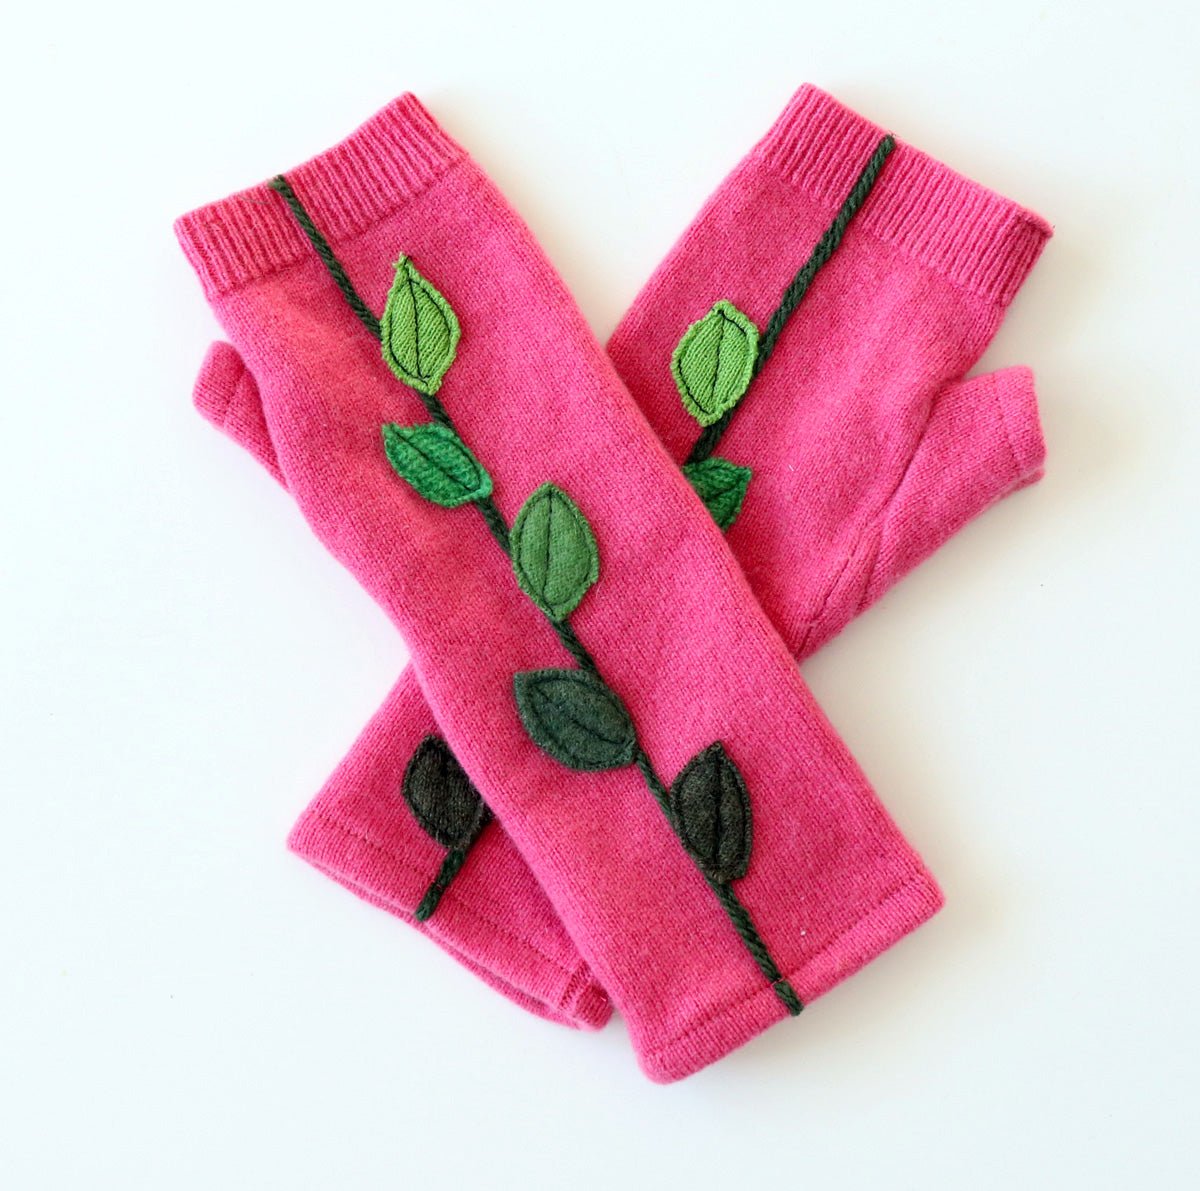 Leaves on Pink Cashmere Fingerless Gloves - BESPOKE PROVISIONS INC